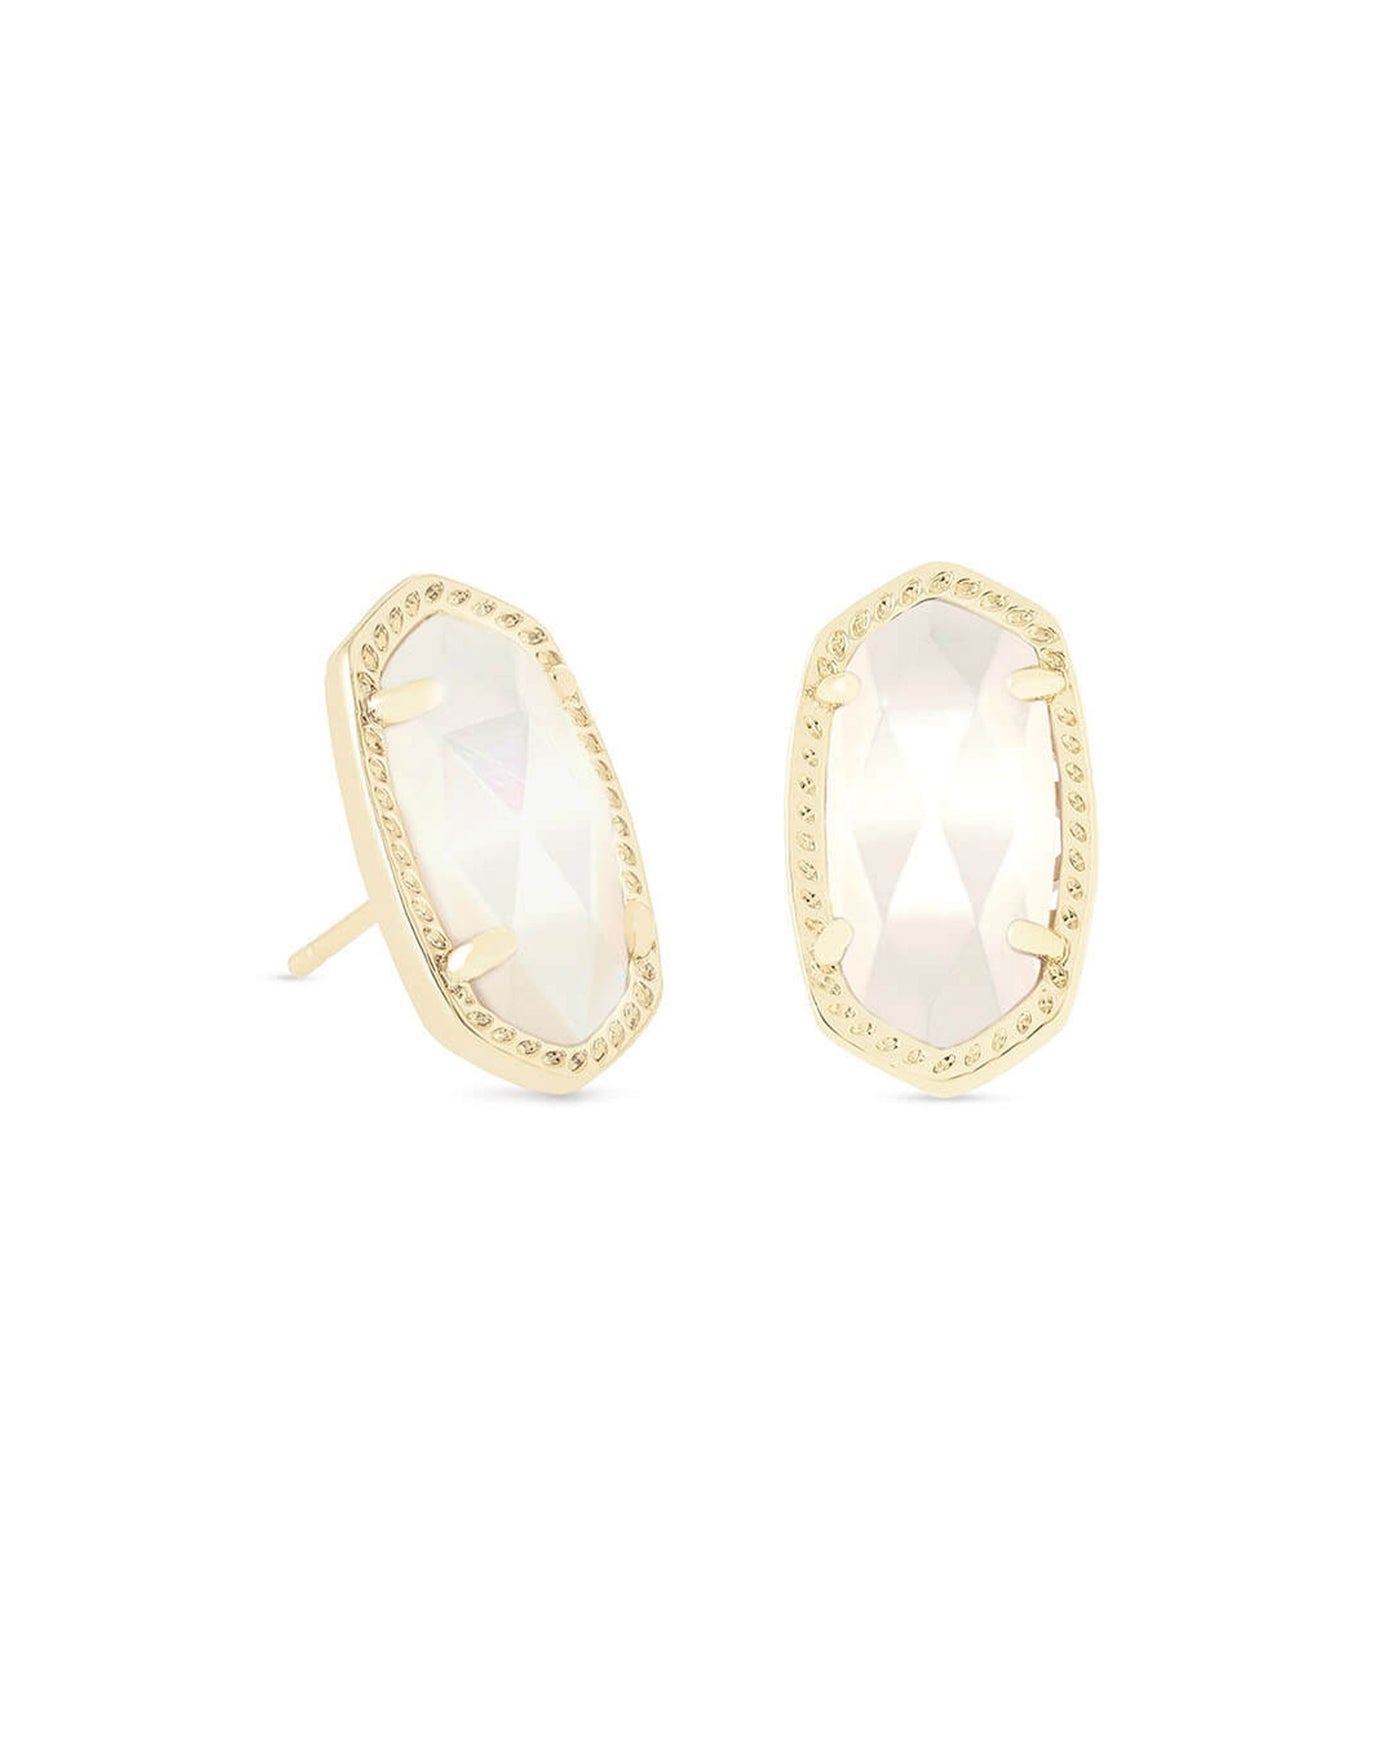 Ellie Stud Earrings Gold Ivory Mother of Pearl on white background, front view.